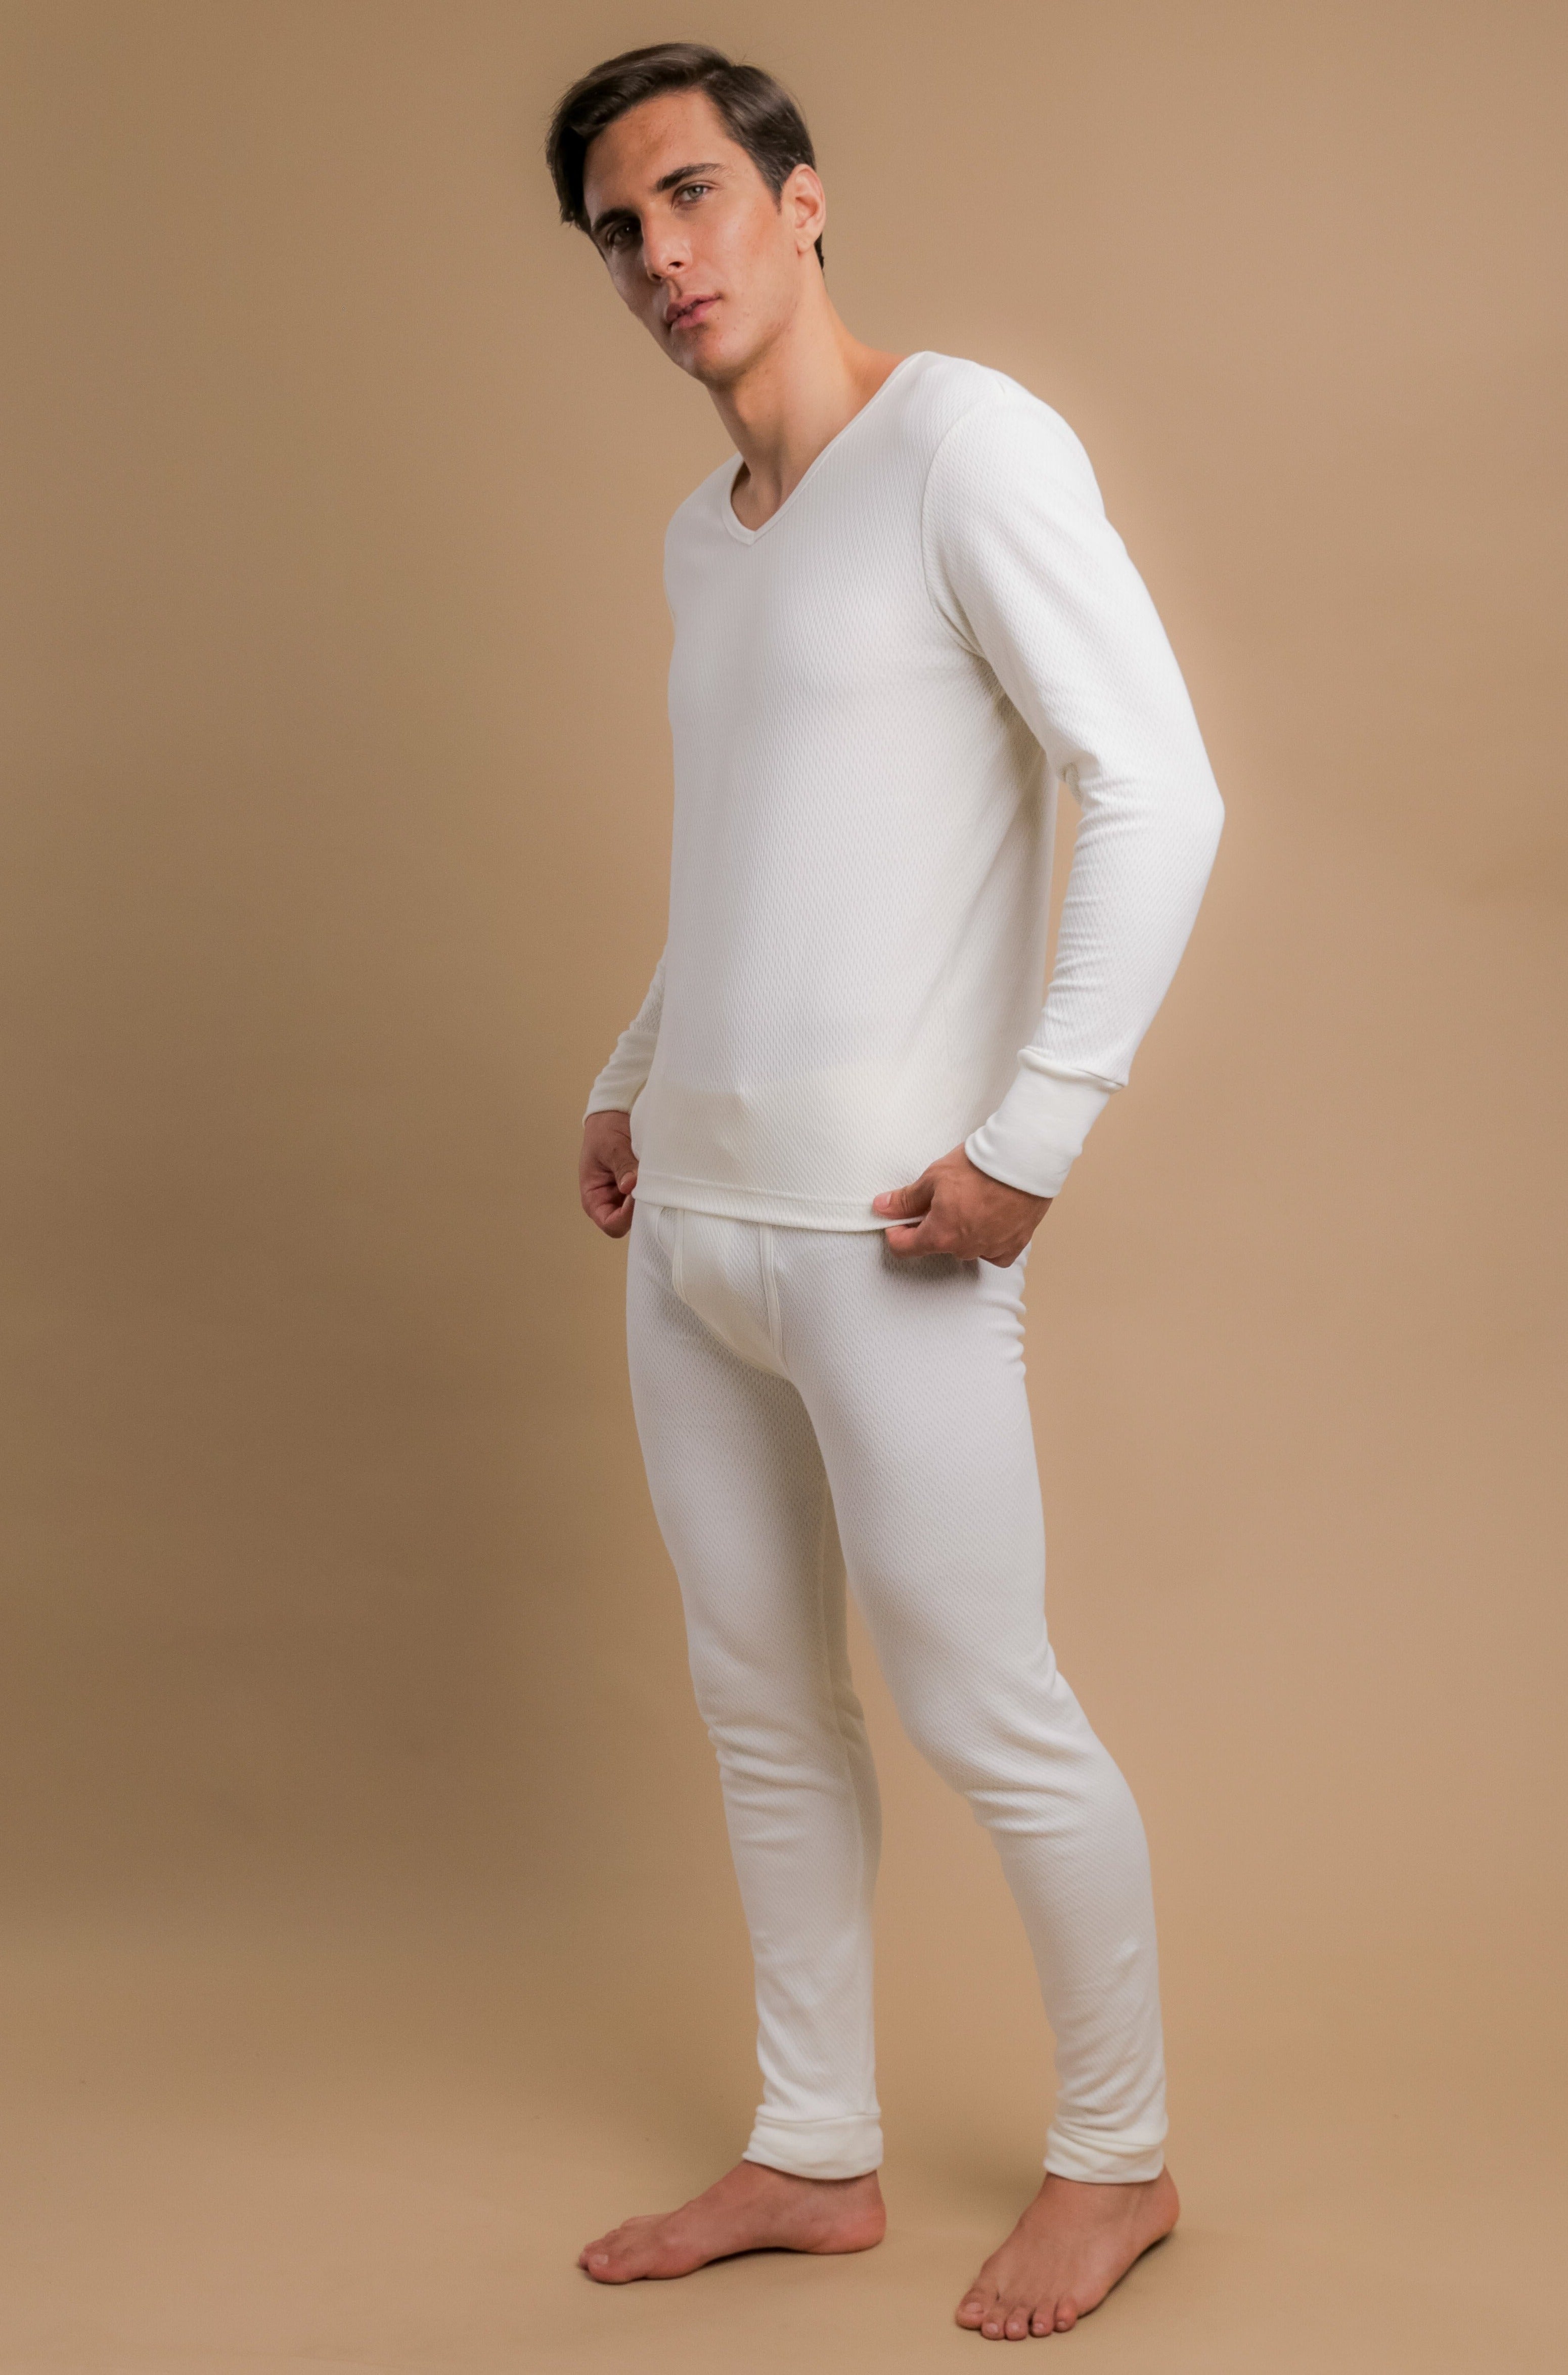 Palm Mens Invisible Seamless Long Sleeve Round Neck Thermal Top Base L -  British Thermals